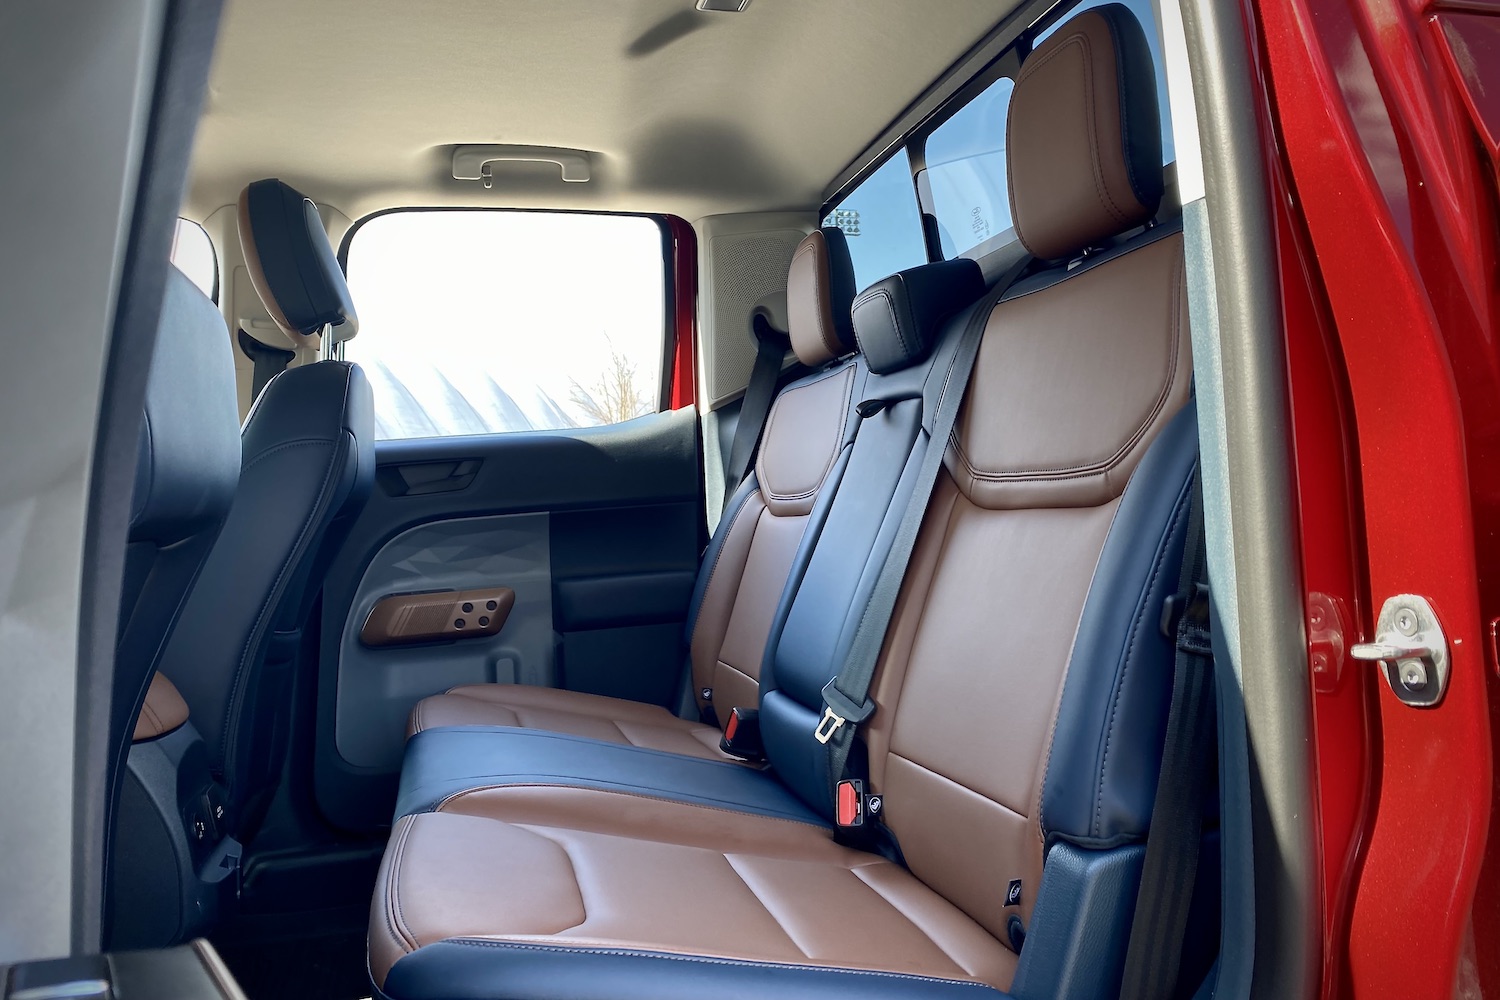 Rear seats in 2022 Ford Maverick from side profile outside of the truck.